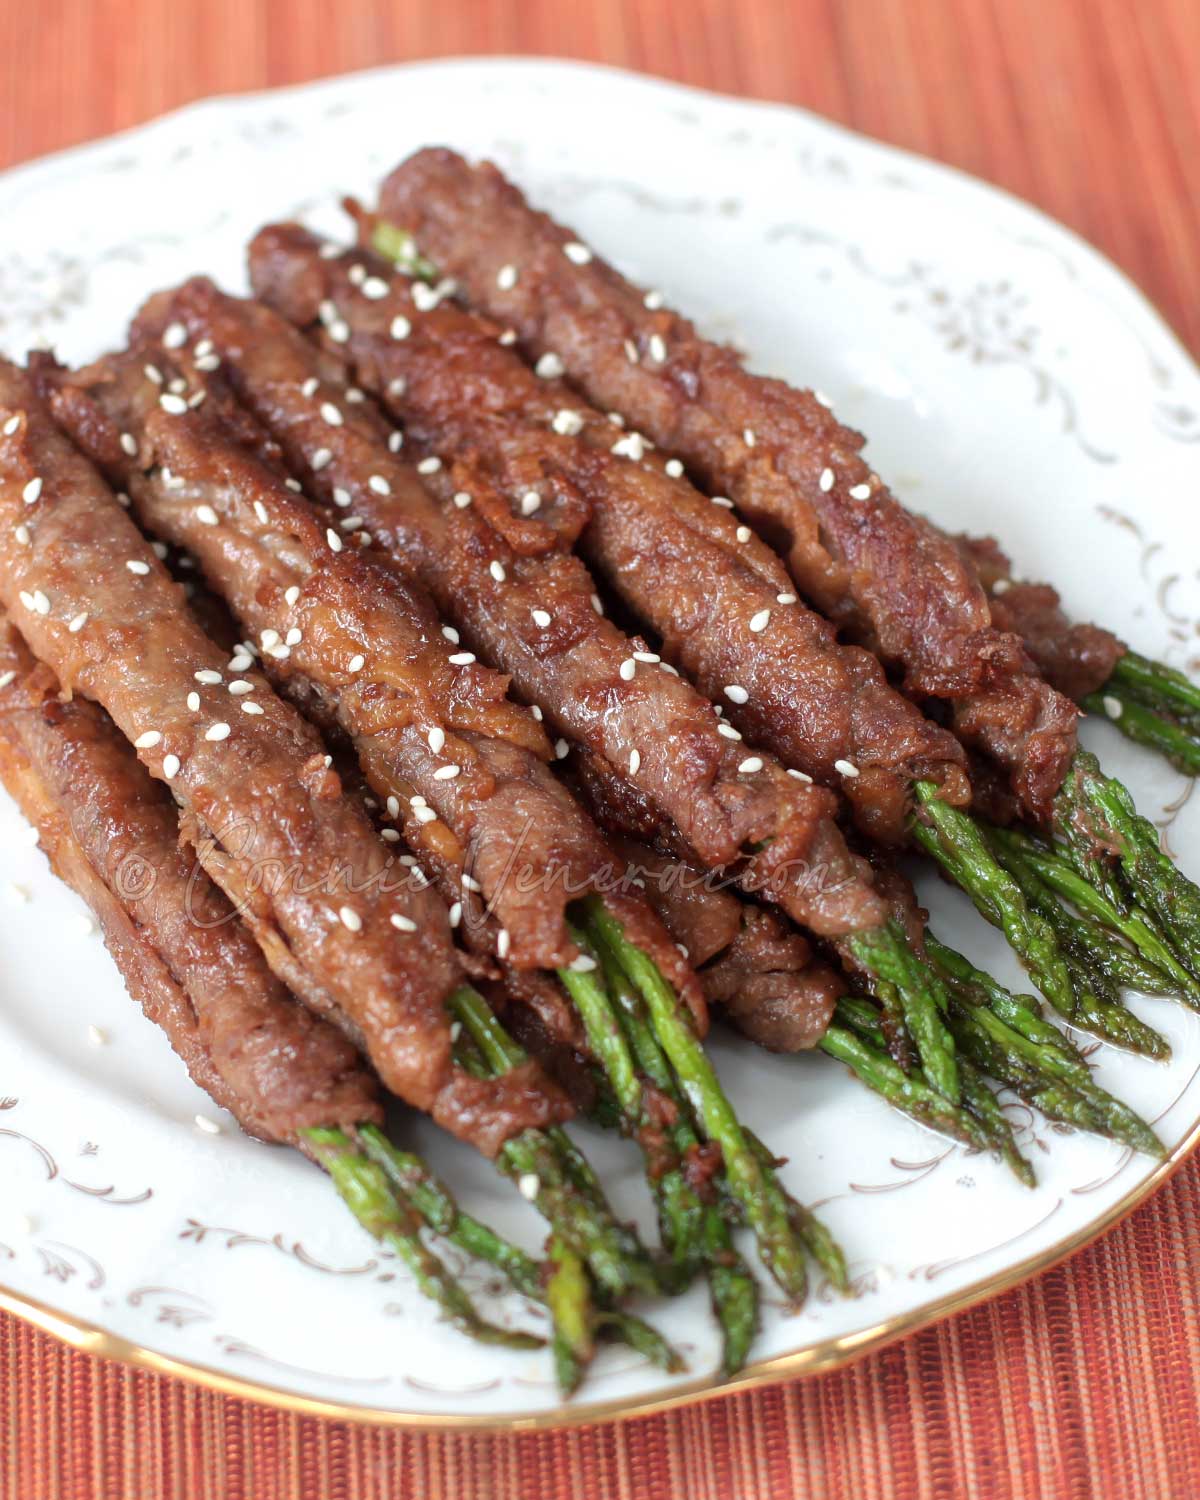 Beef and asparagus rolls with ginger teriyaki sauce